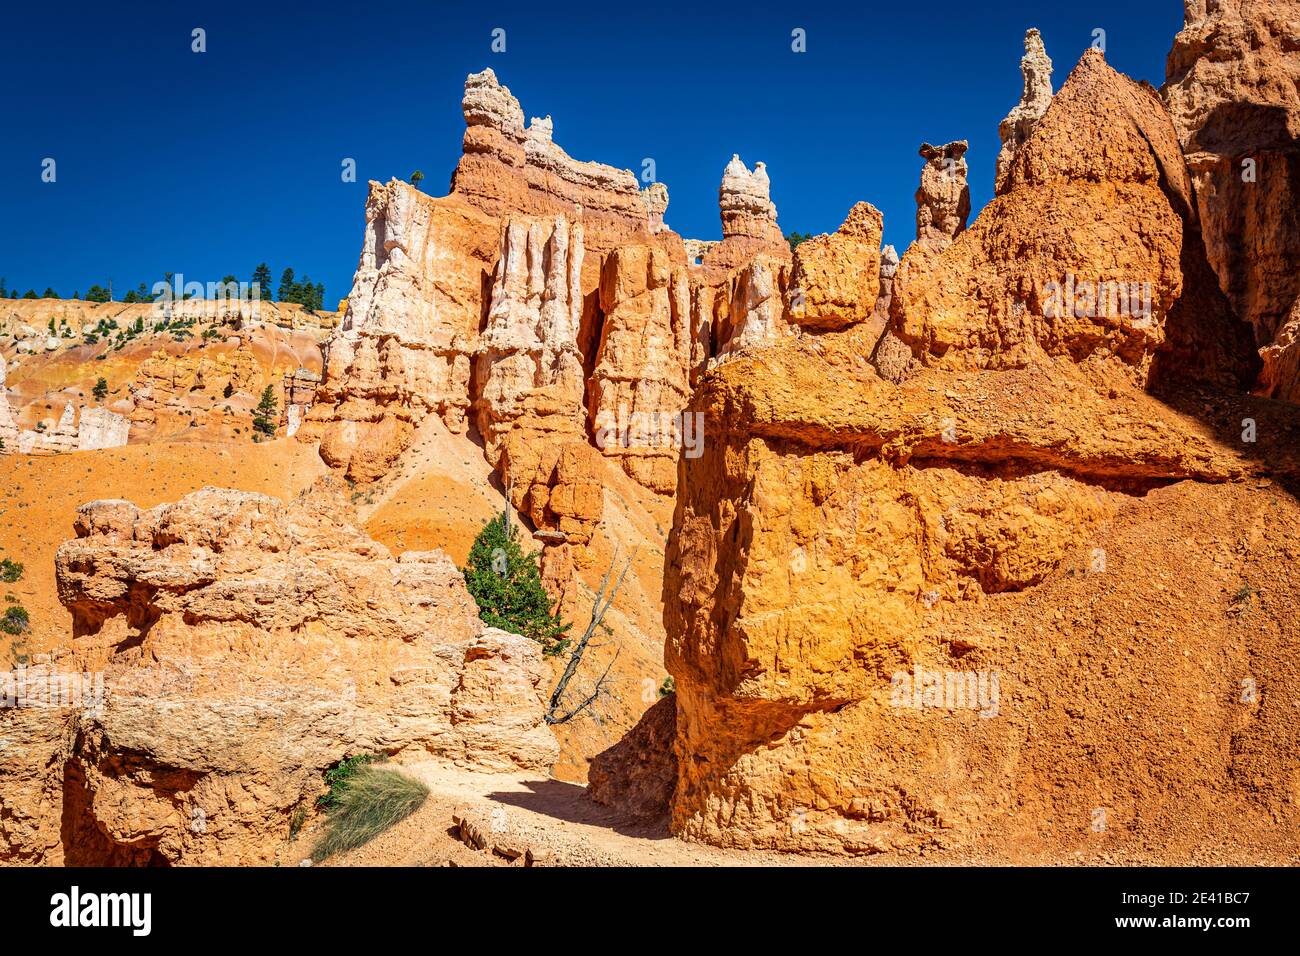 Hoodoo and eroded cliff formations at Bryce Canyon National Park in Utah. Stock Photo